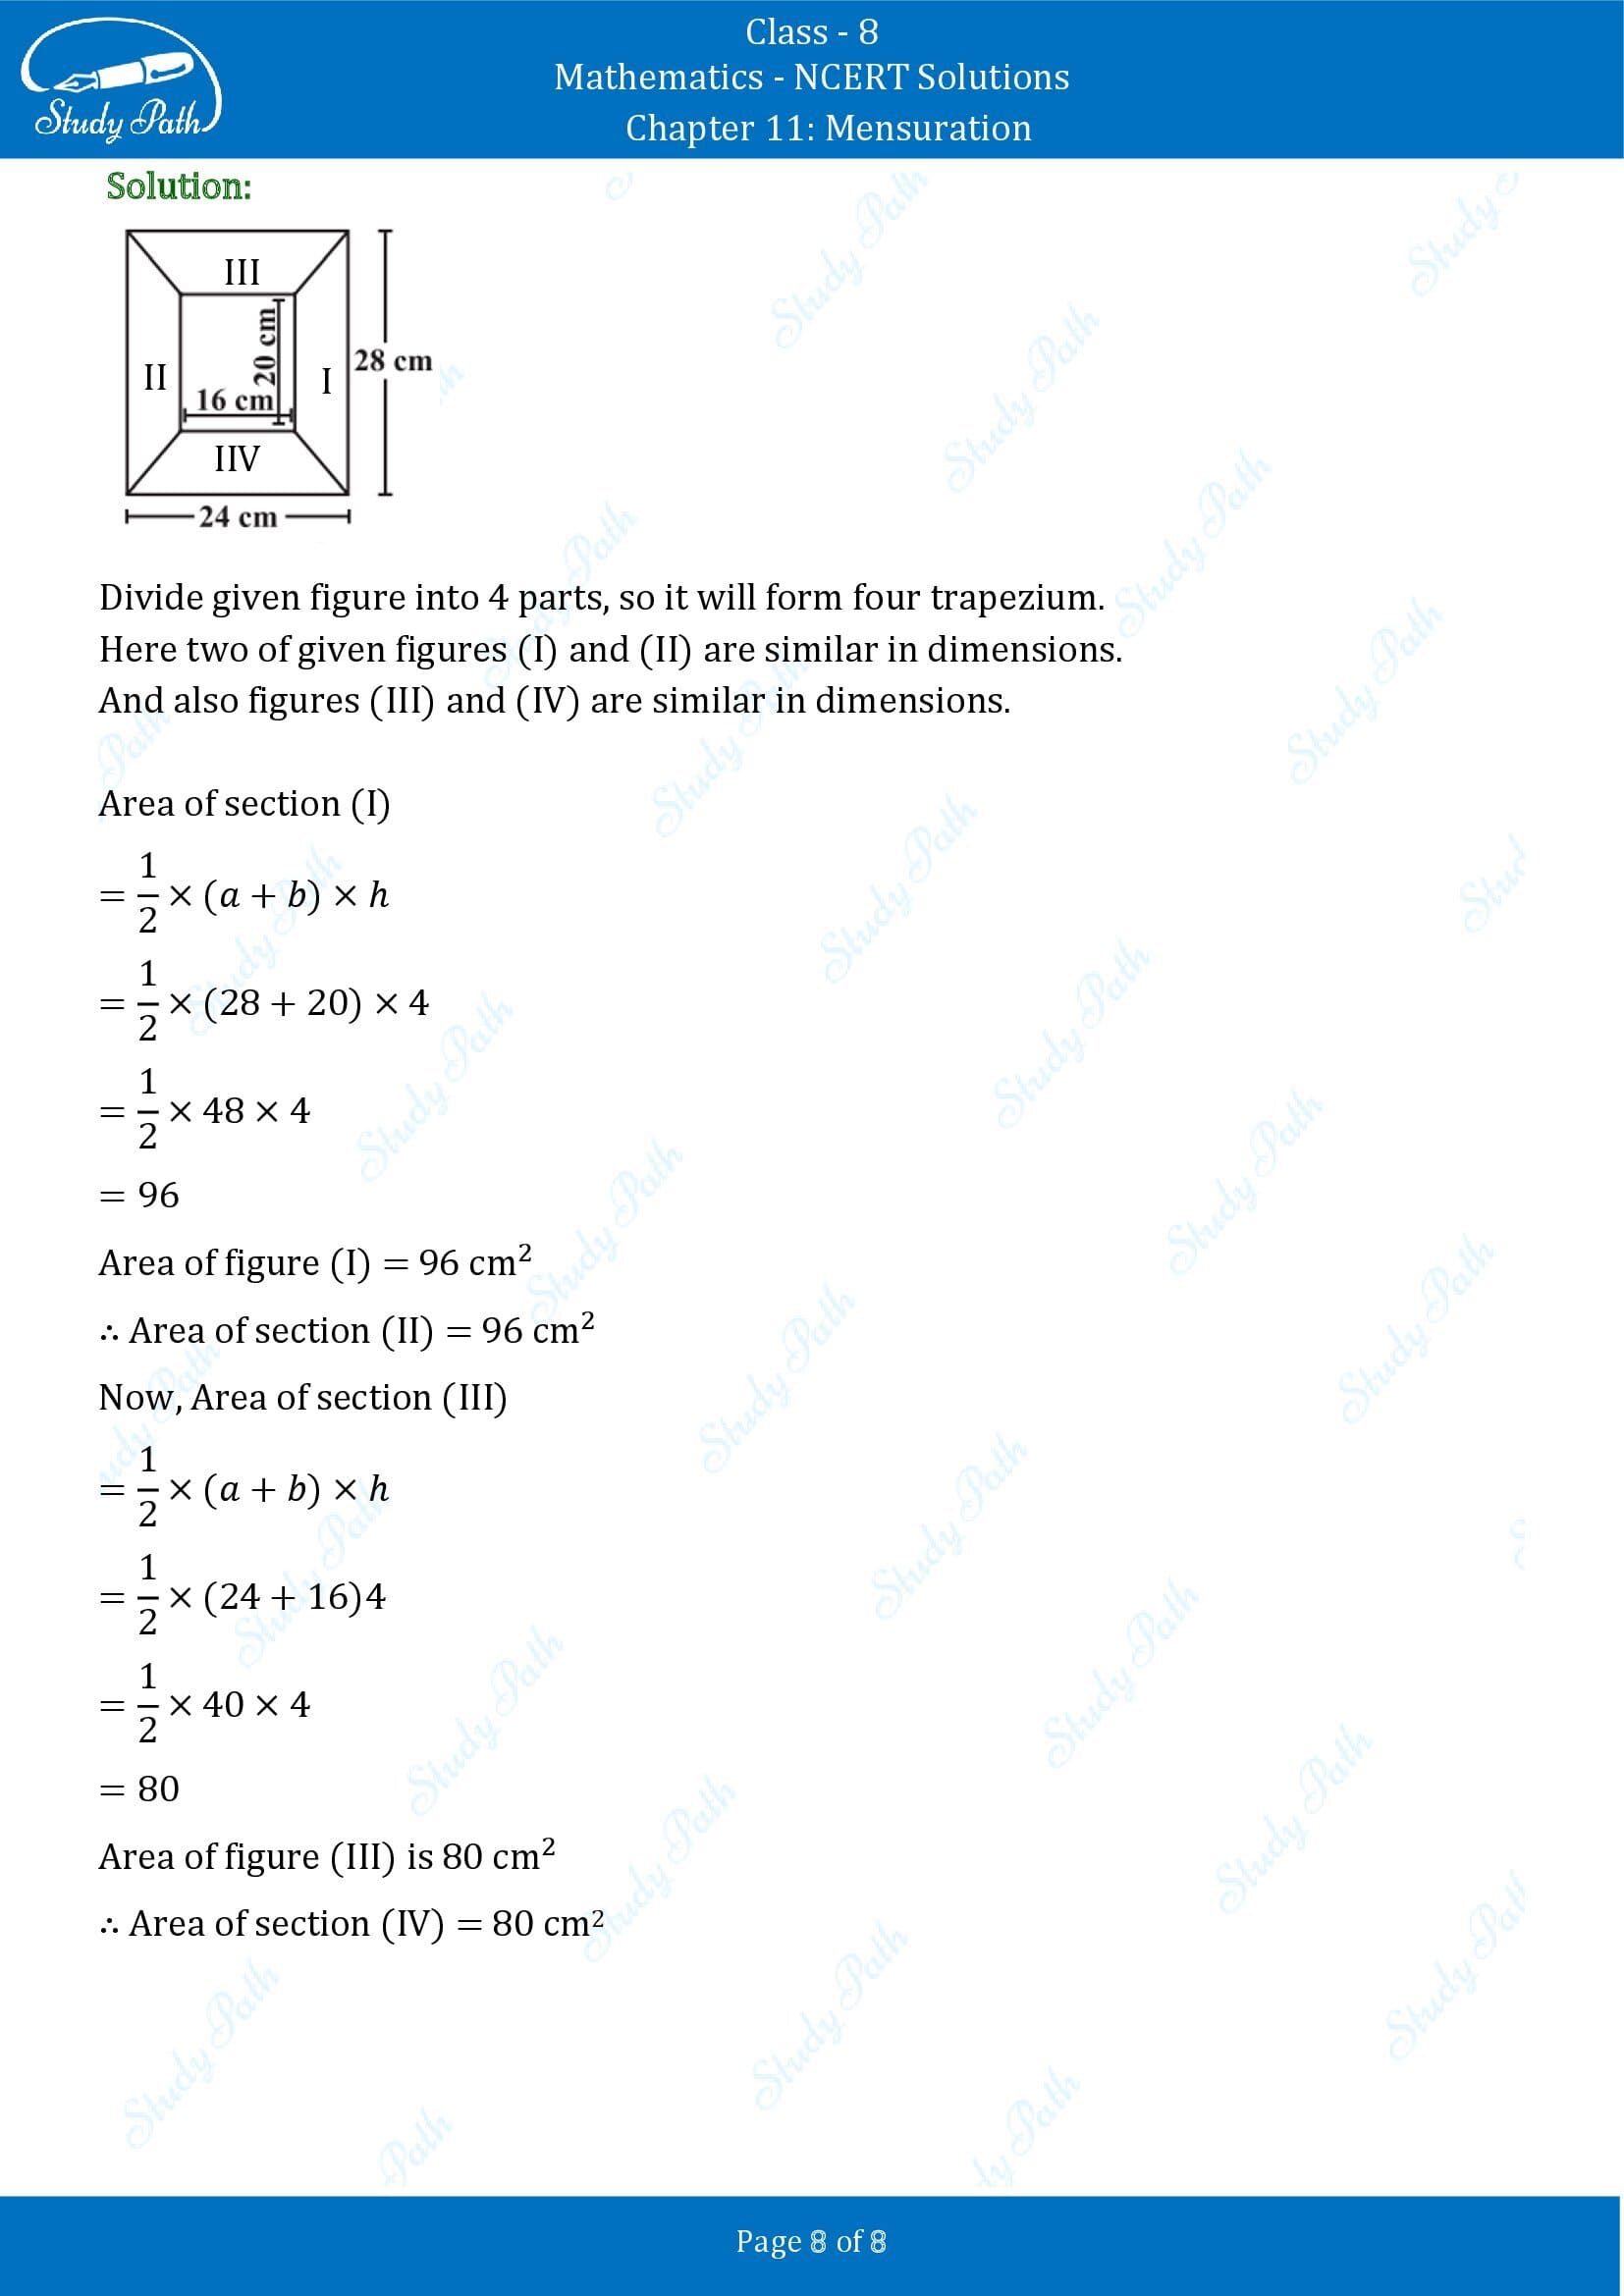 NCERT Solutions for Class 8 Maths Chapter 11 Mensuration Exercise 11.2 00008